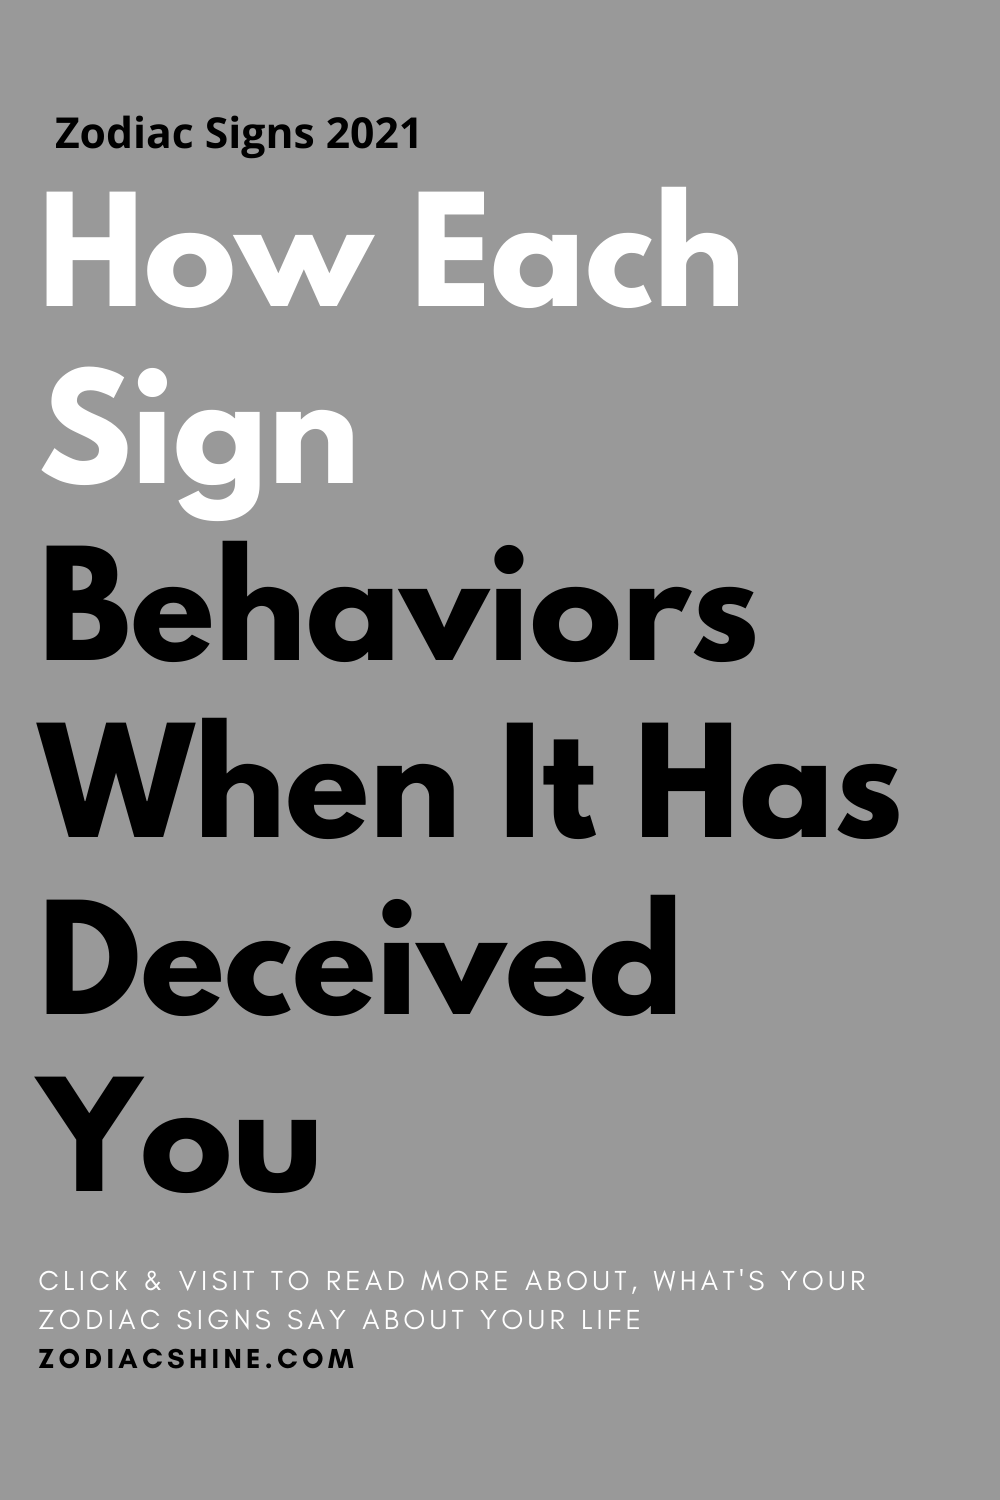 How Each Sign Behaviors When It Has Deceived You